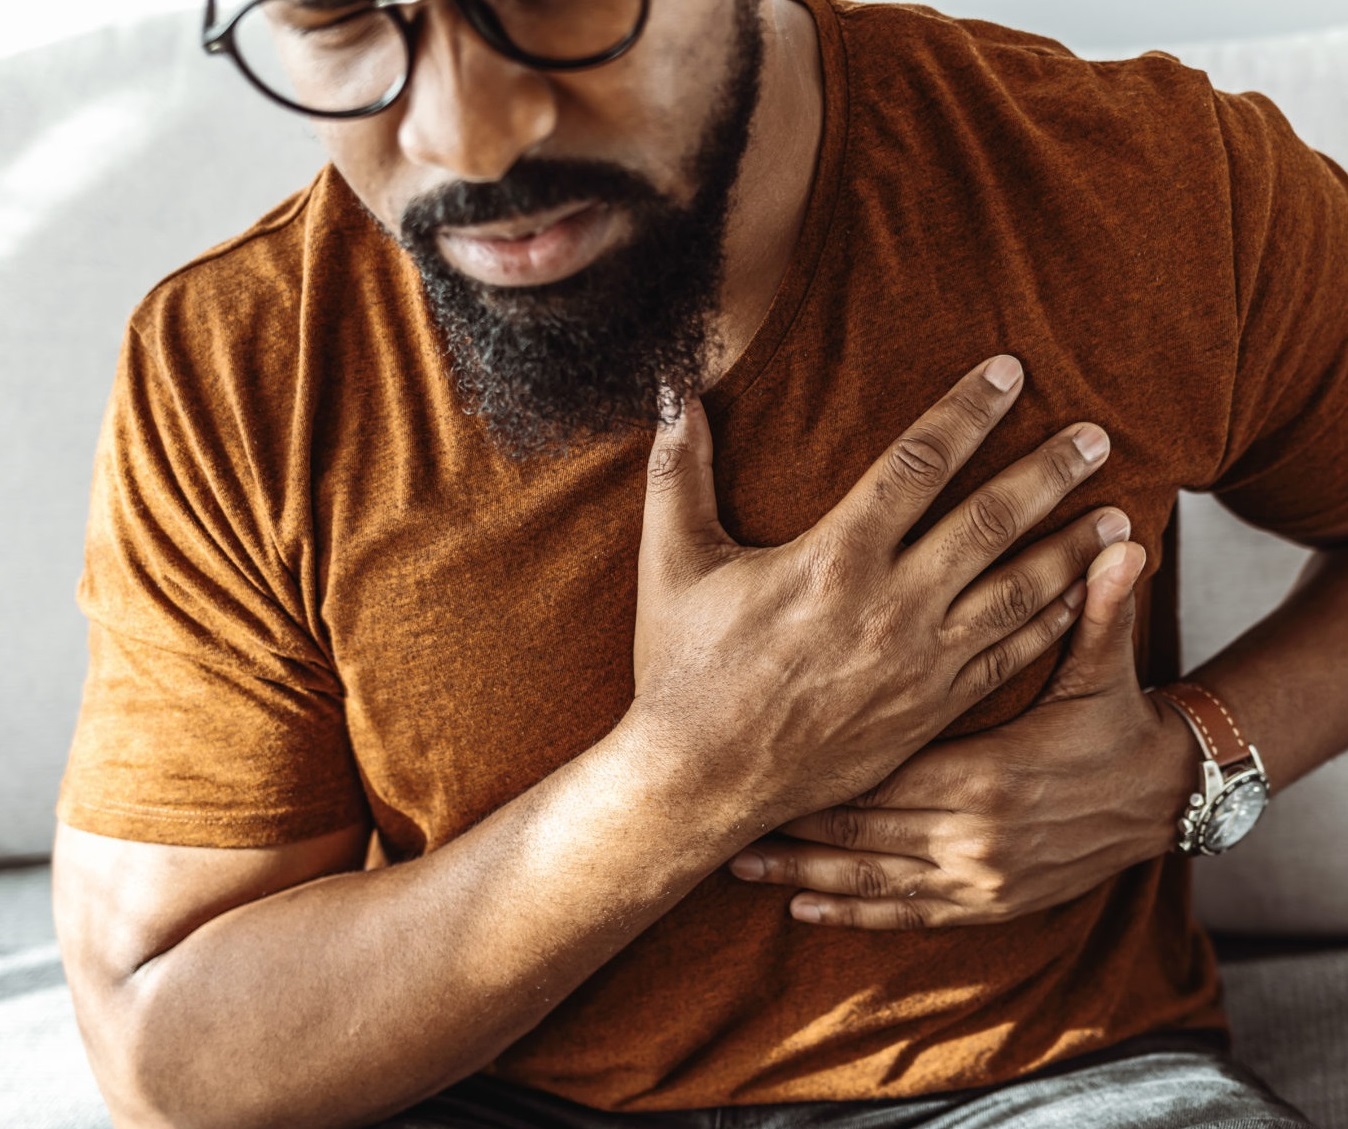 Can Heart Failure Be Reversed?